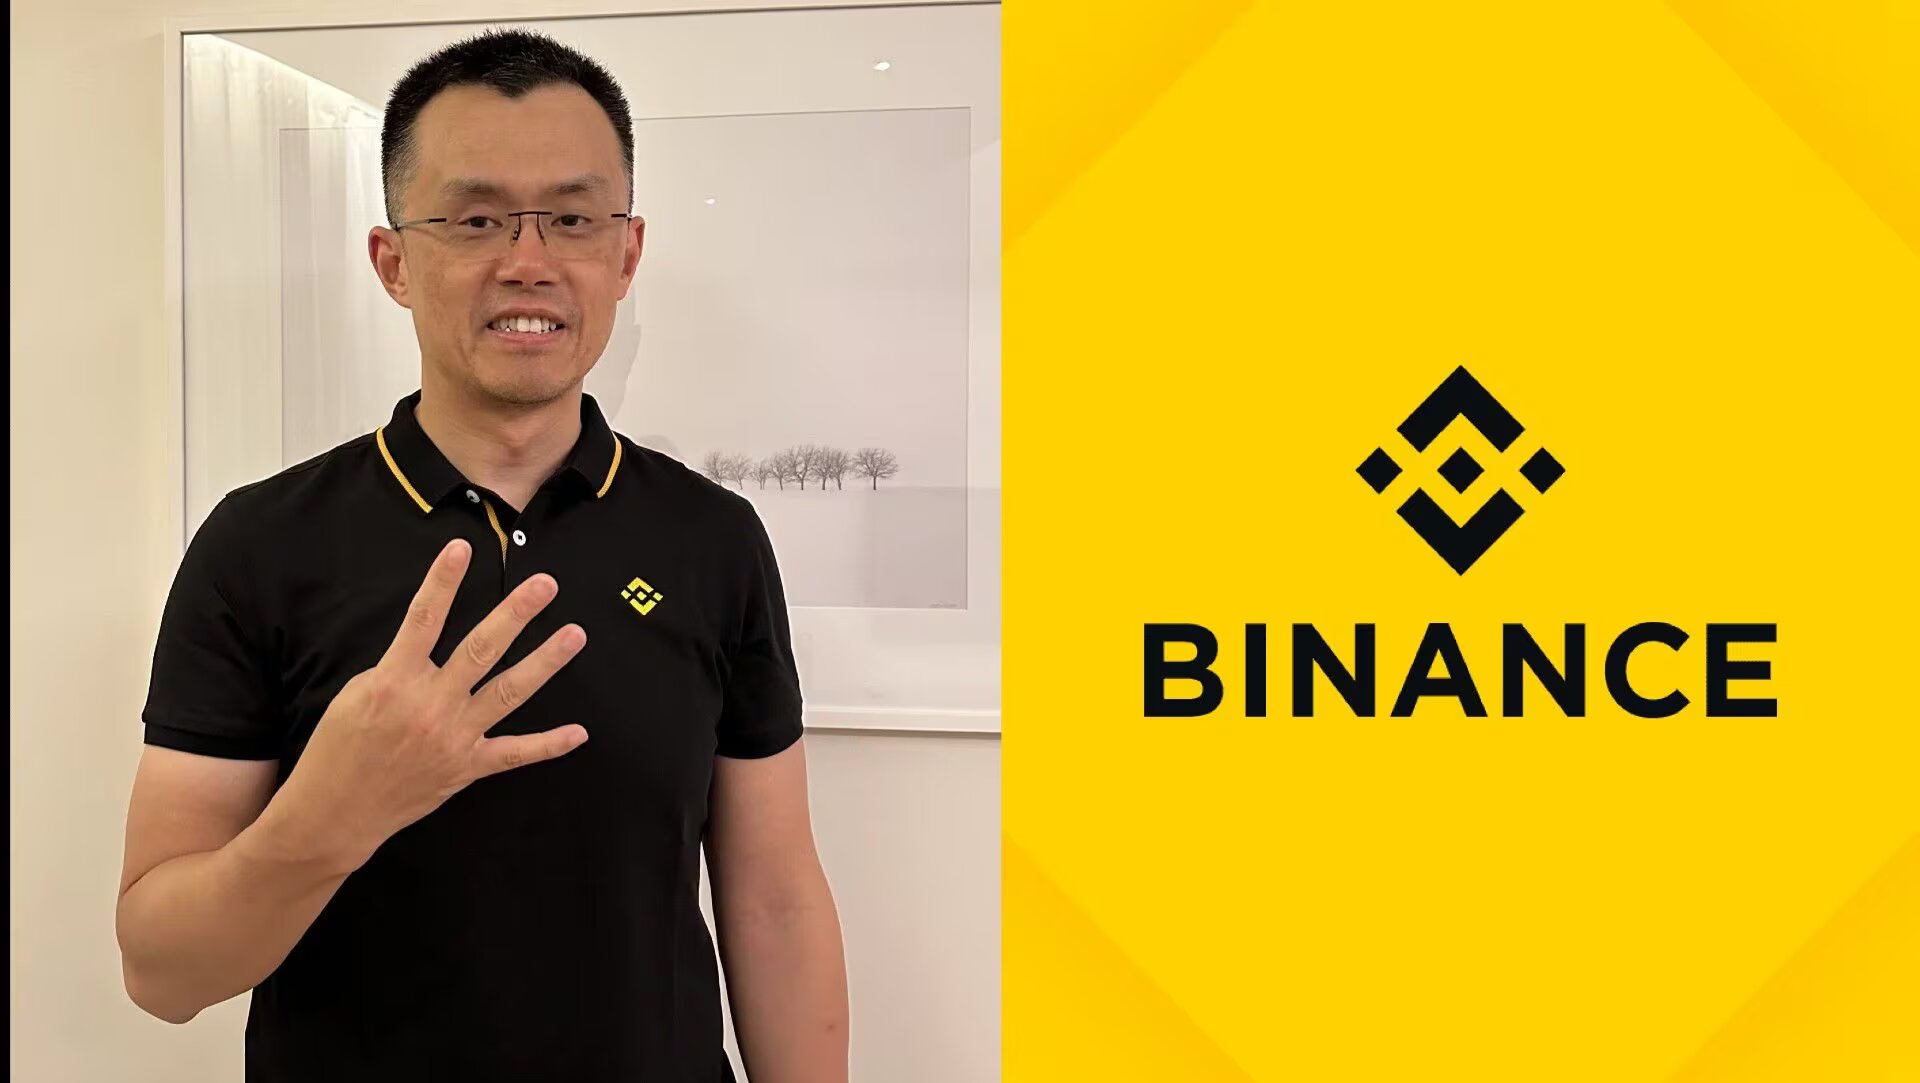 Binance CEO Resigns After Pleading Guilty to Money-Laundering Charges, Crypto Exchange to Pay $4.3 Billion in Penalties